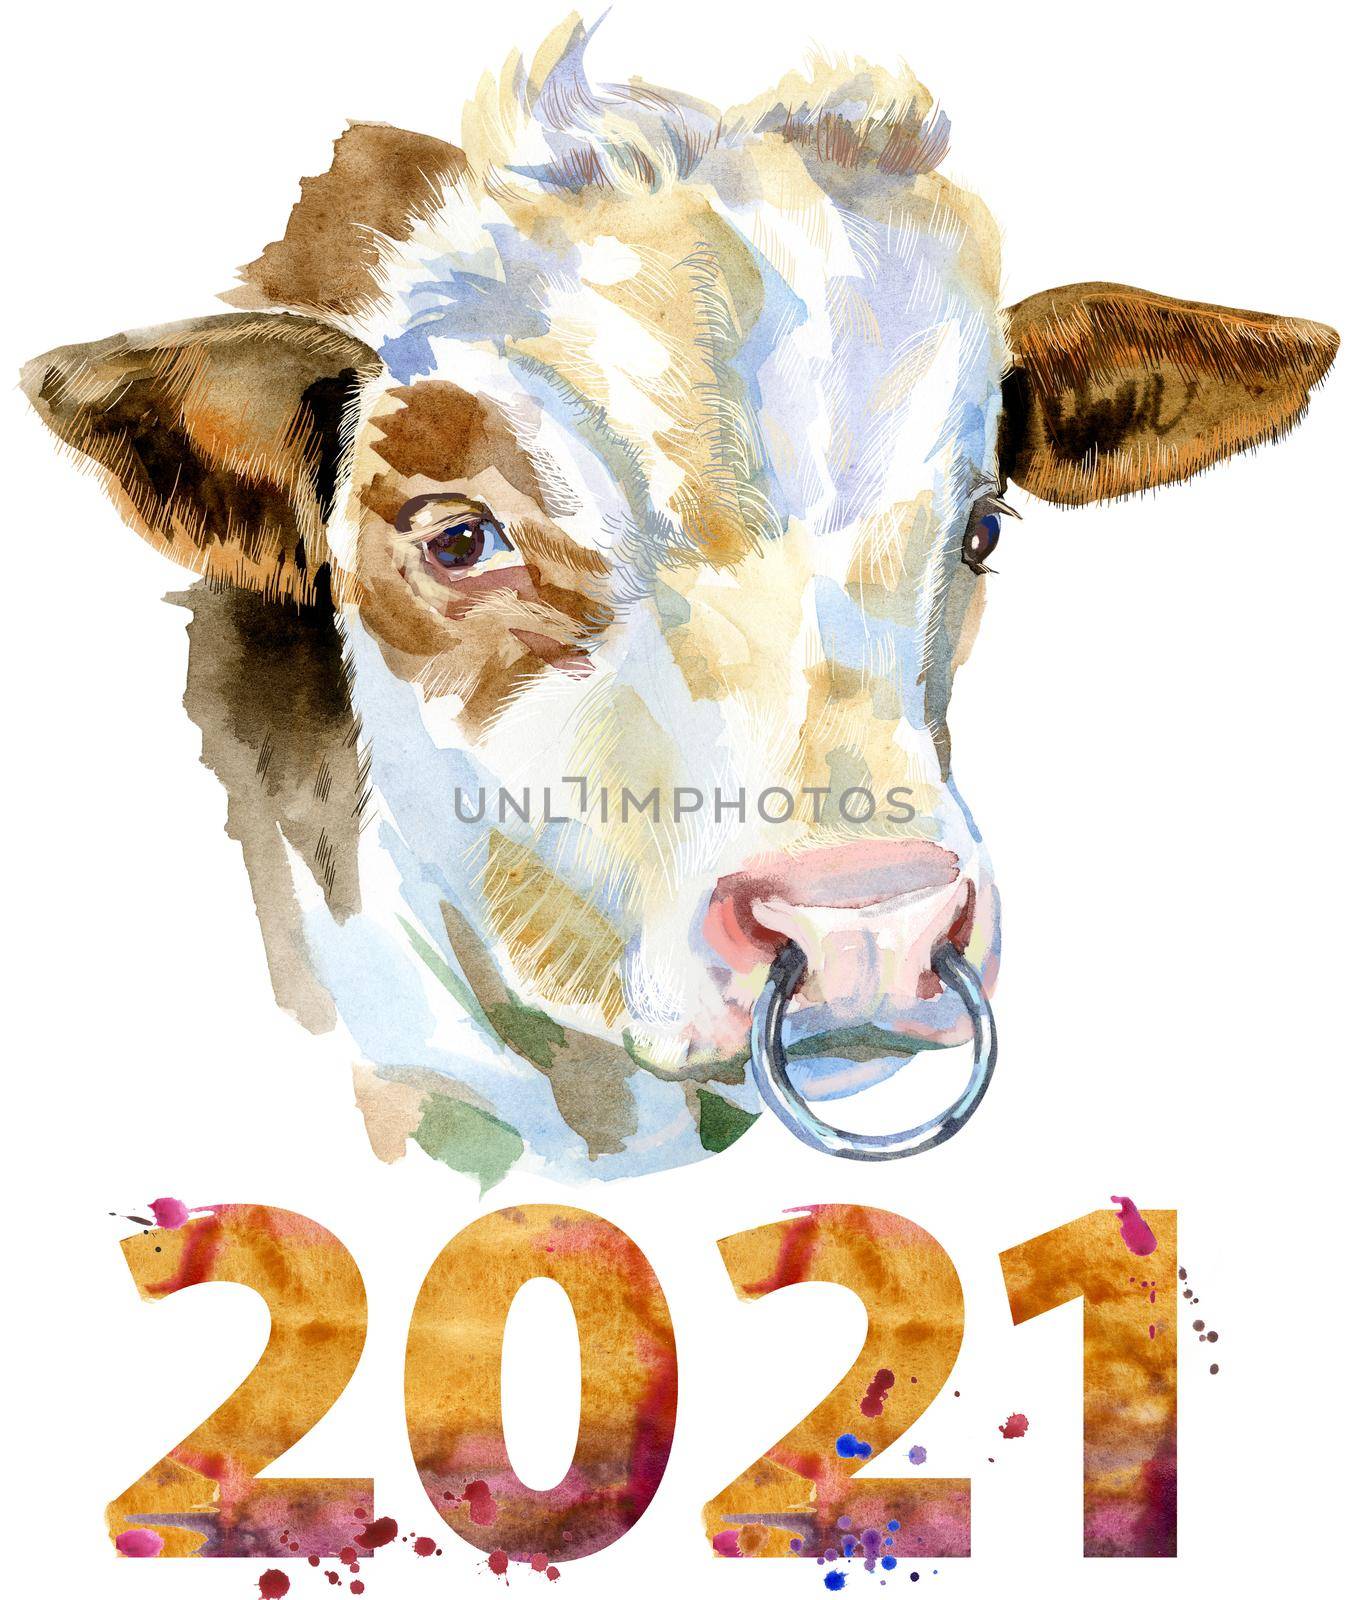 Bull with number 2021 watercolor graphics. Bull animal illustration watercolor textured background.